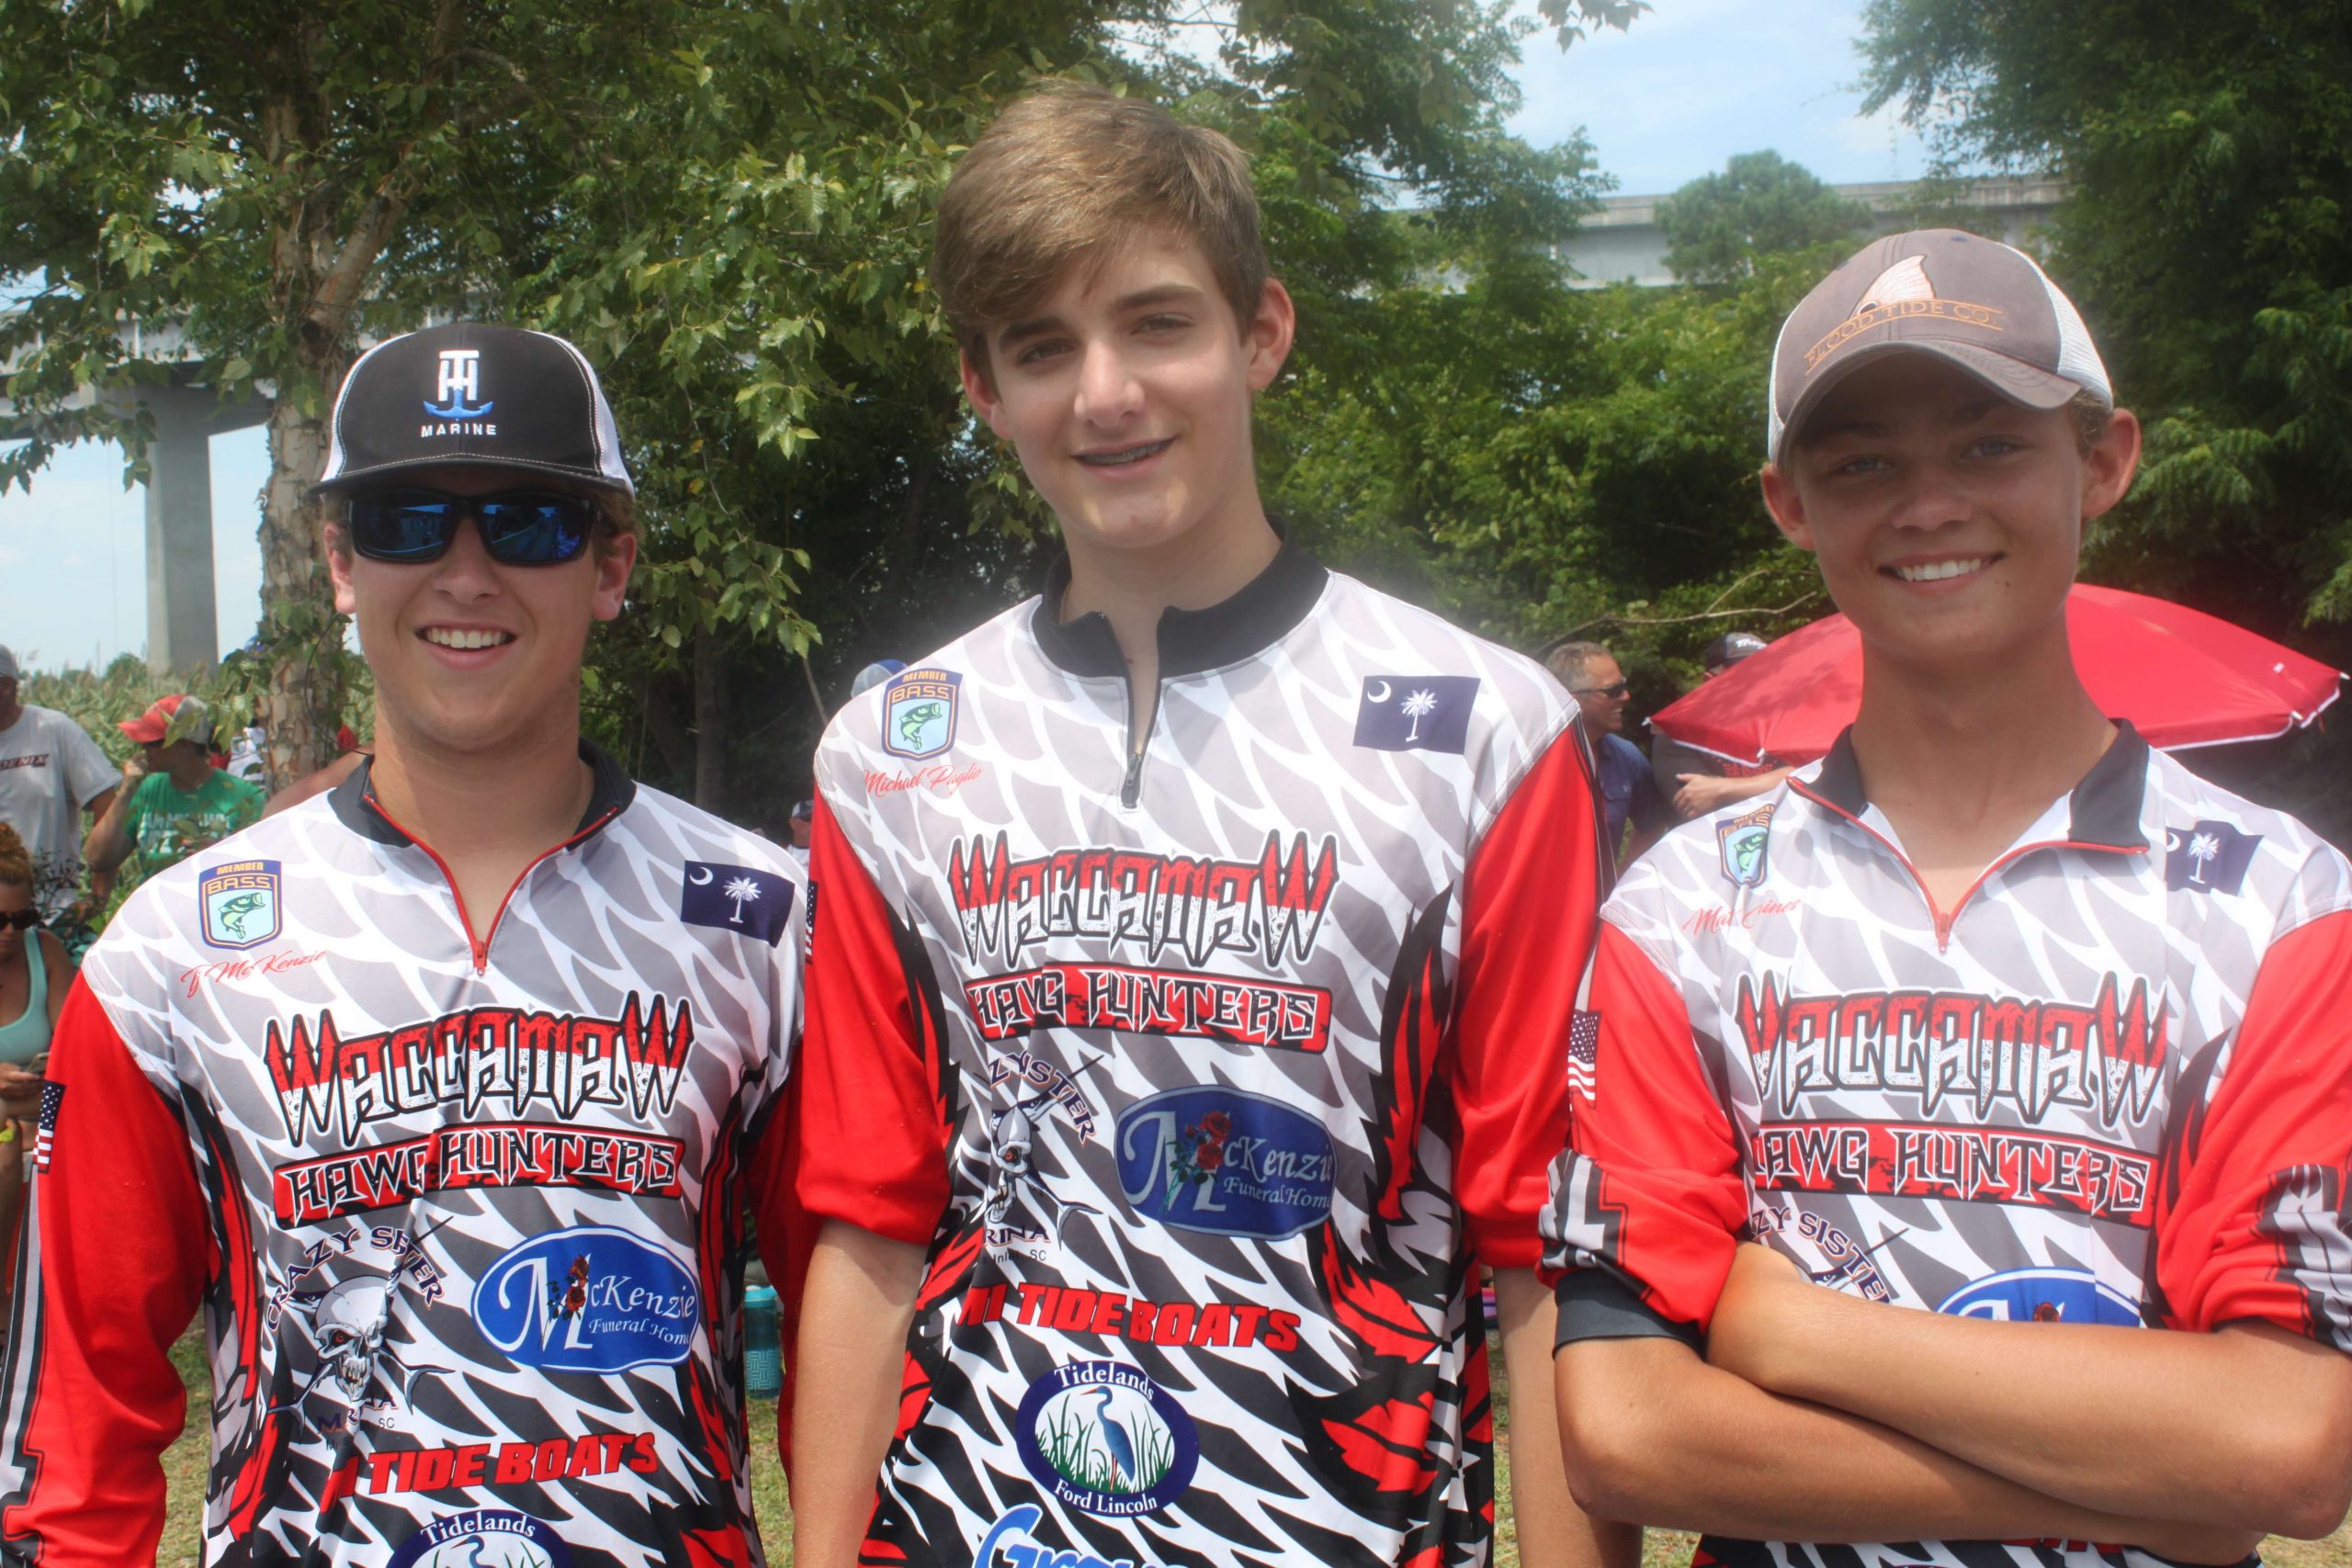 Every B.A.S.S. tournament is only as good as the fans and volunteers. Pictured are Waccamaw High School anglers, from left, T.J. McKenzie, Michael Paglio and Matt Caines.